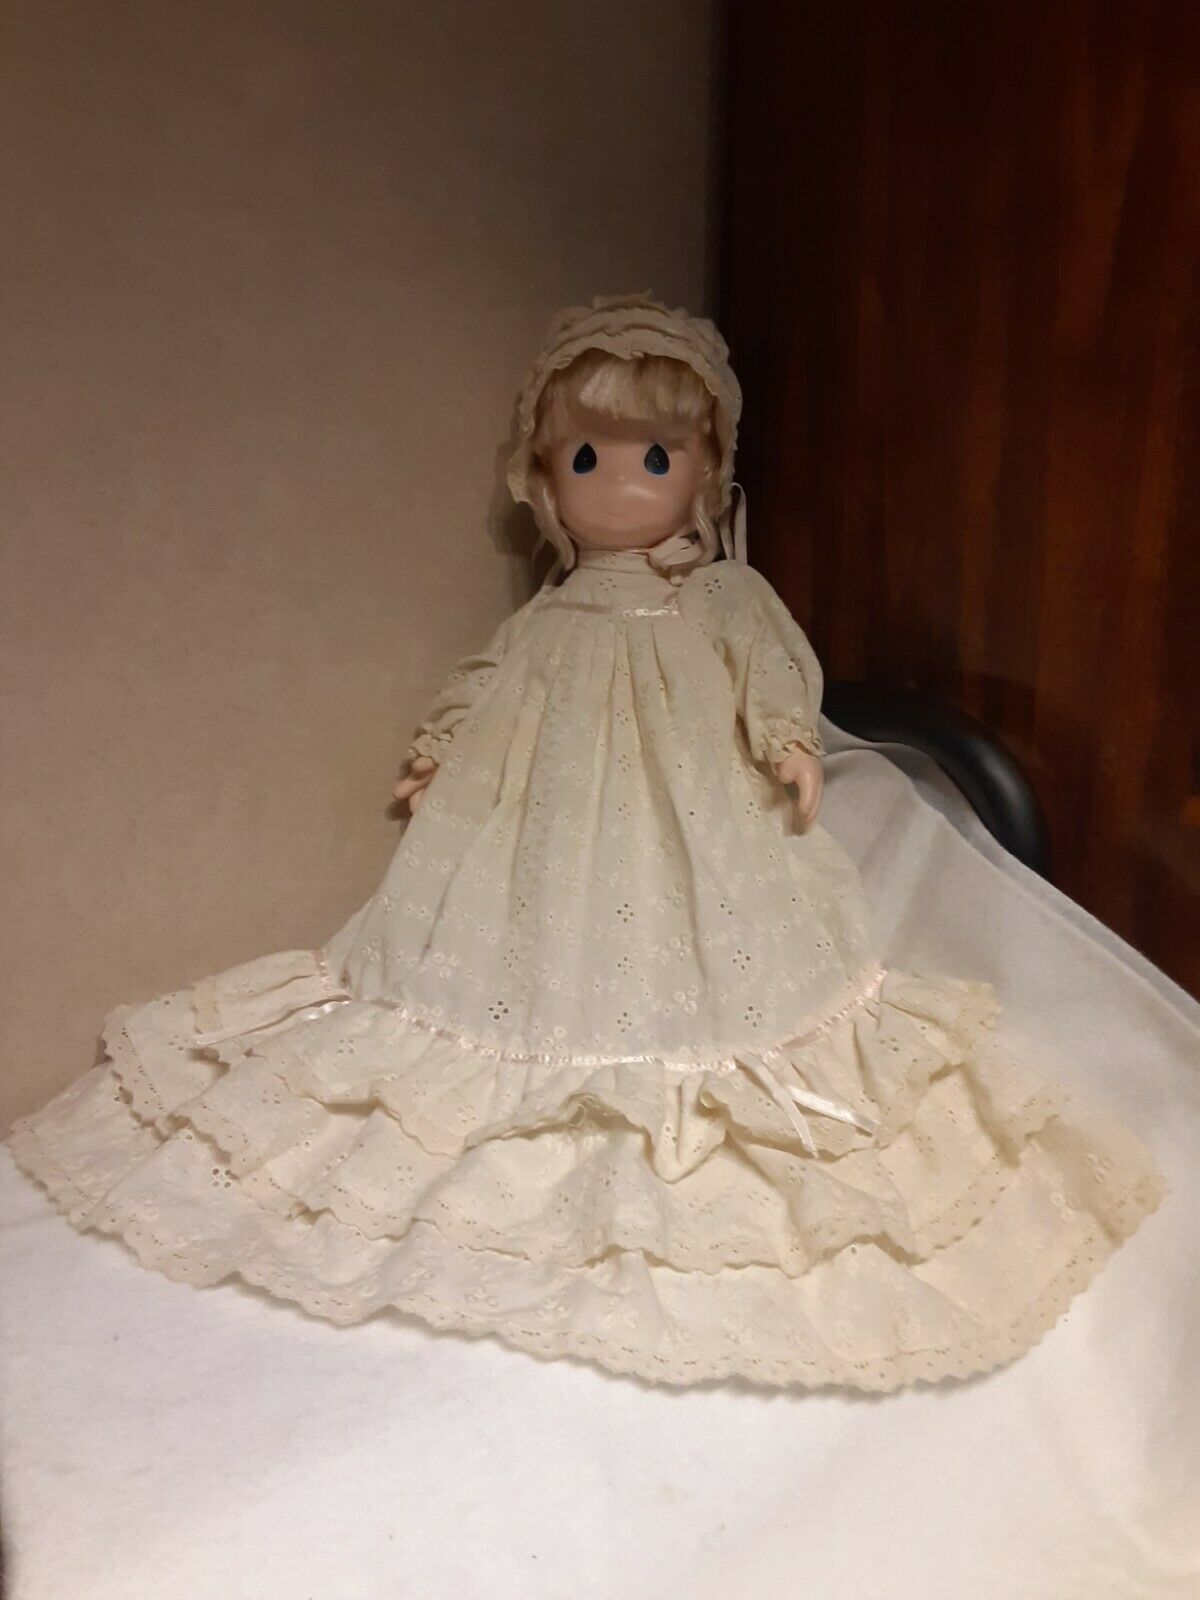 Vintage 1992 Precious Moments "jenny" Doll Eyelet Dress 16" Christening Gown